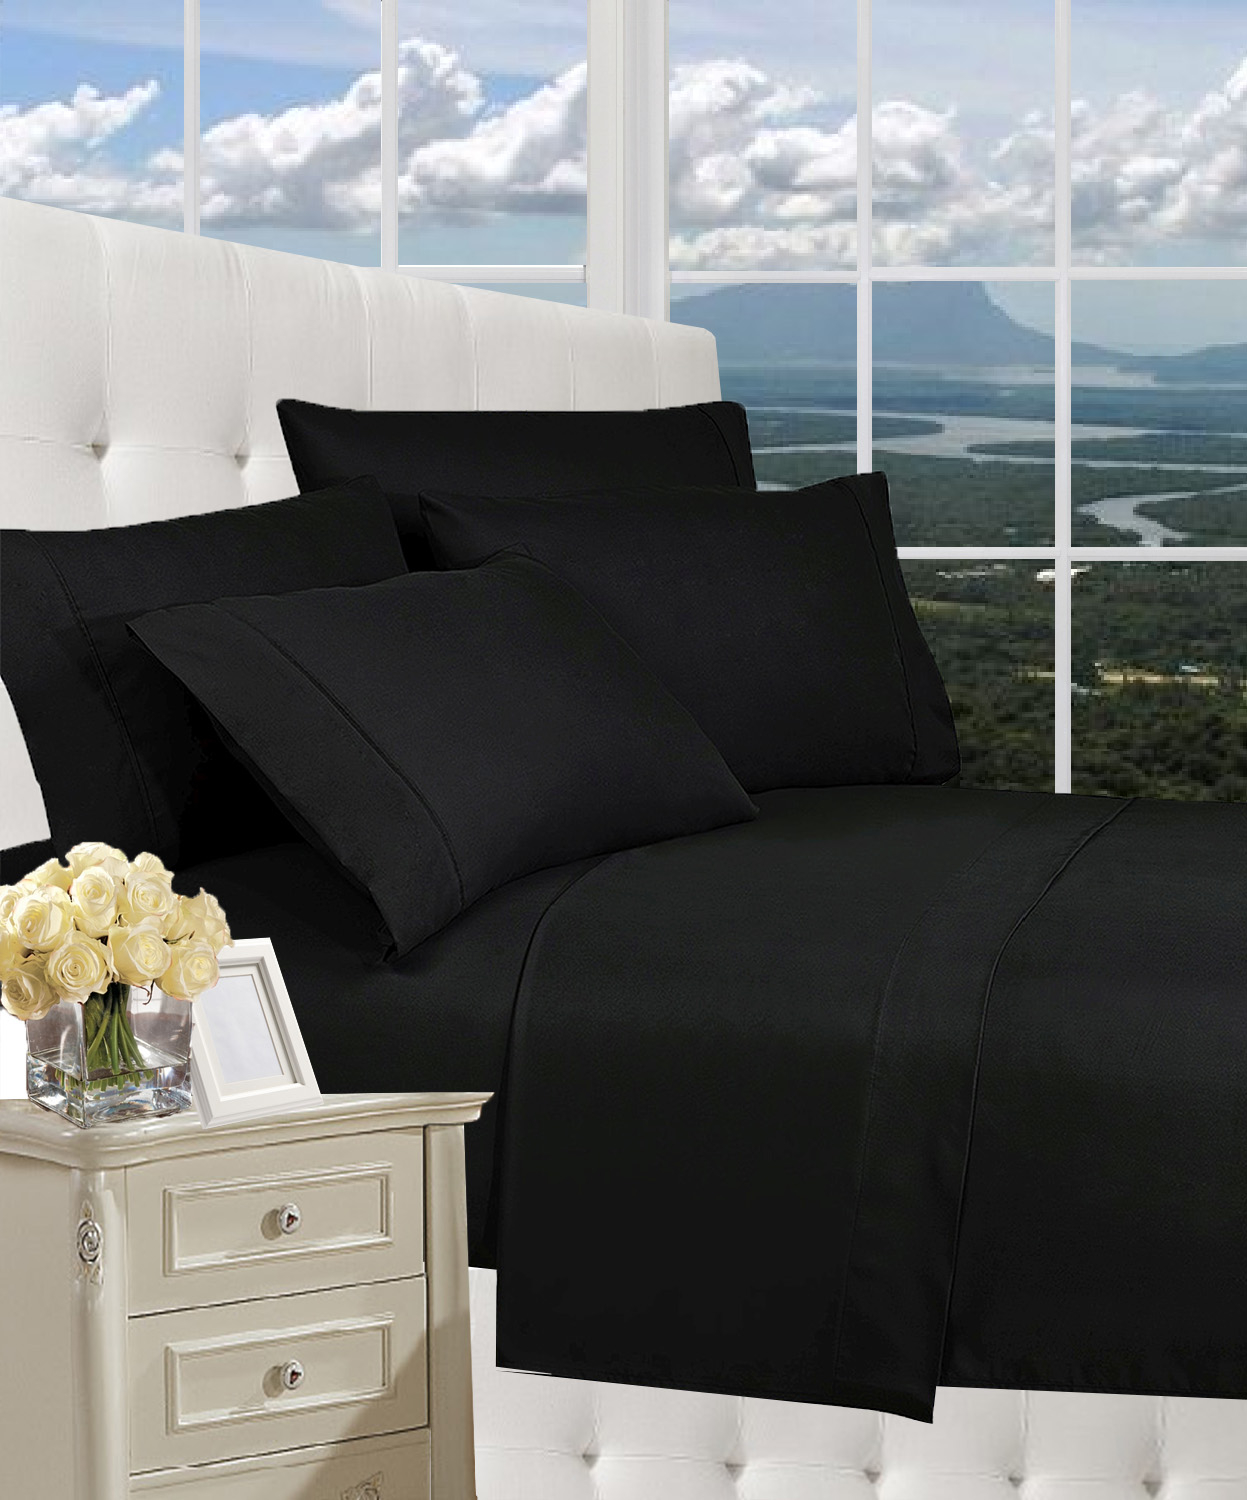 Elegant Comfort 1800 Series Wrinkle Resistant Egyptian Quality Hypoallergenic Ultra Soft Luxury 4-piece Bed Sheet Set, Queen, Black